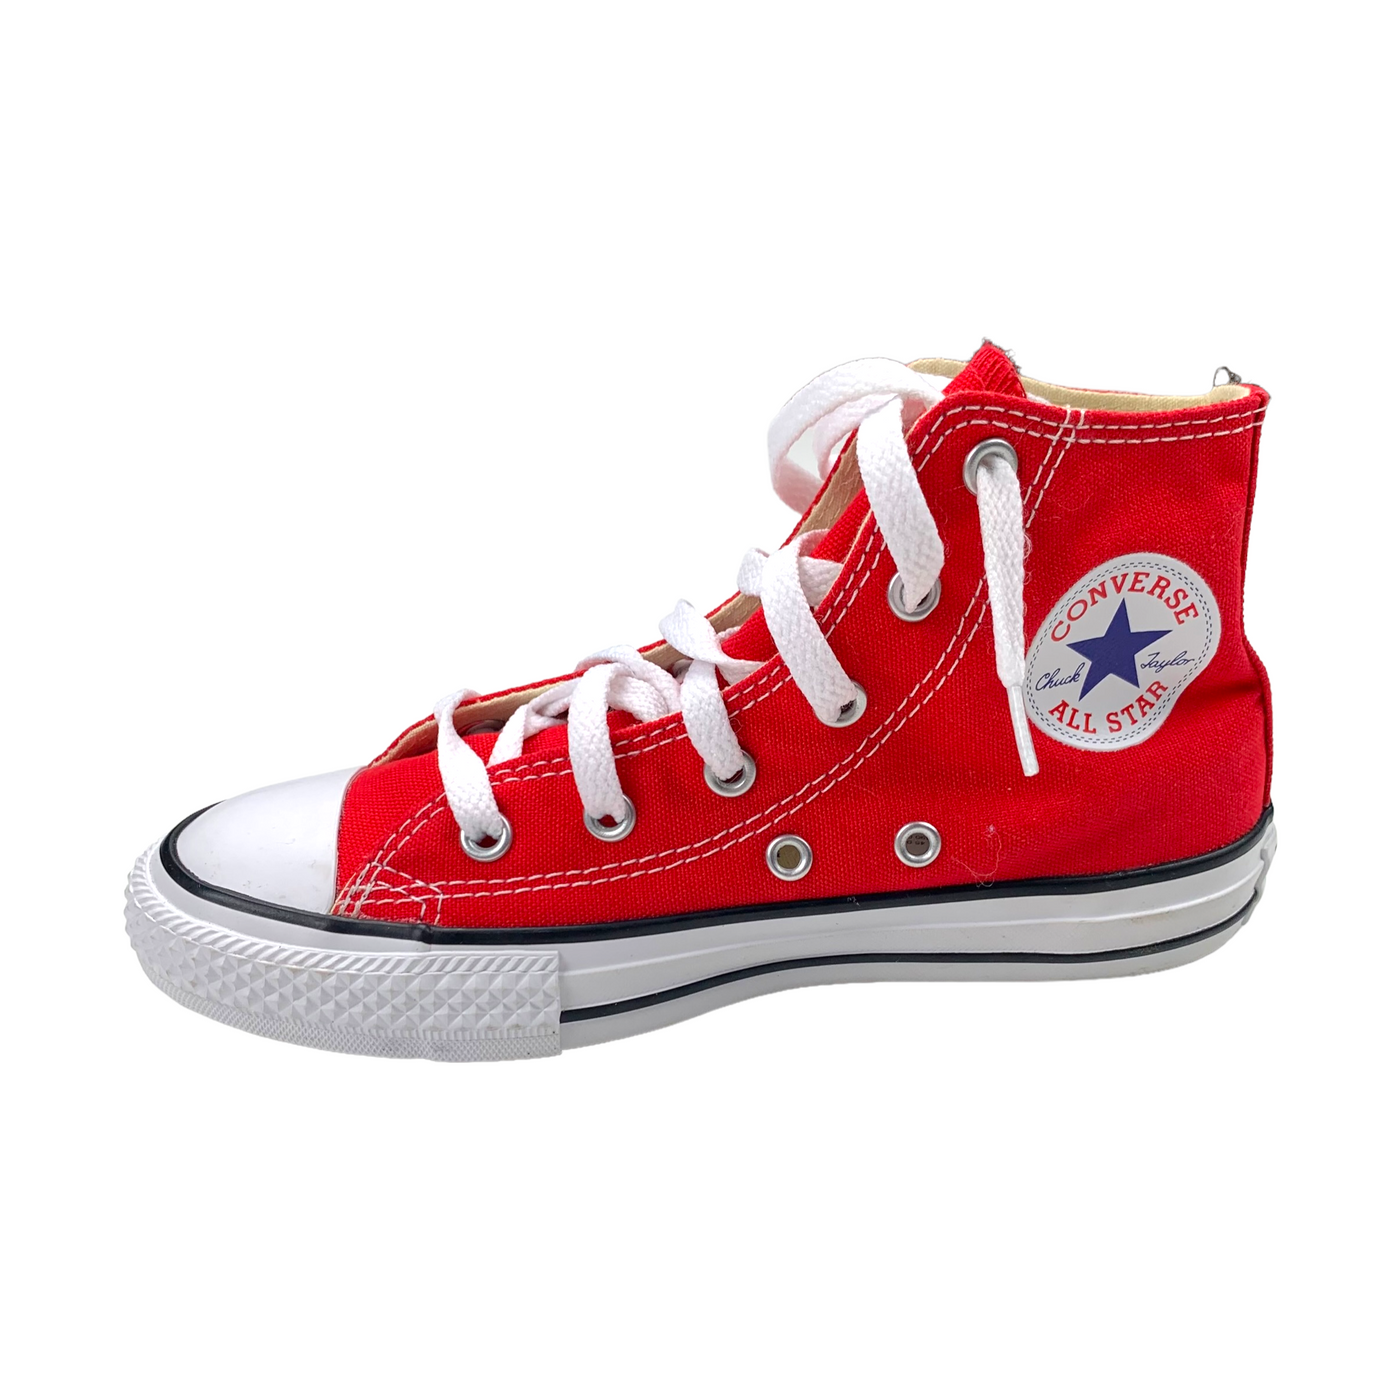 Converse sneakers Allstar Hi red size 32